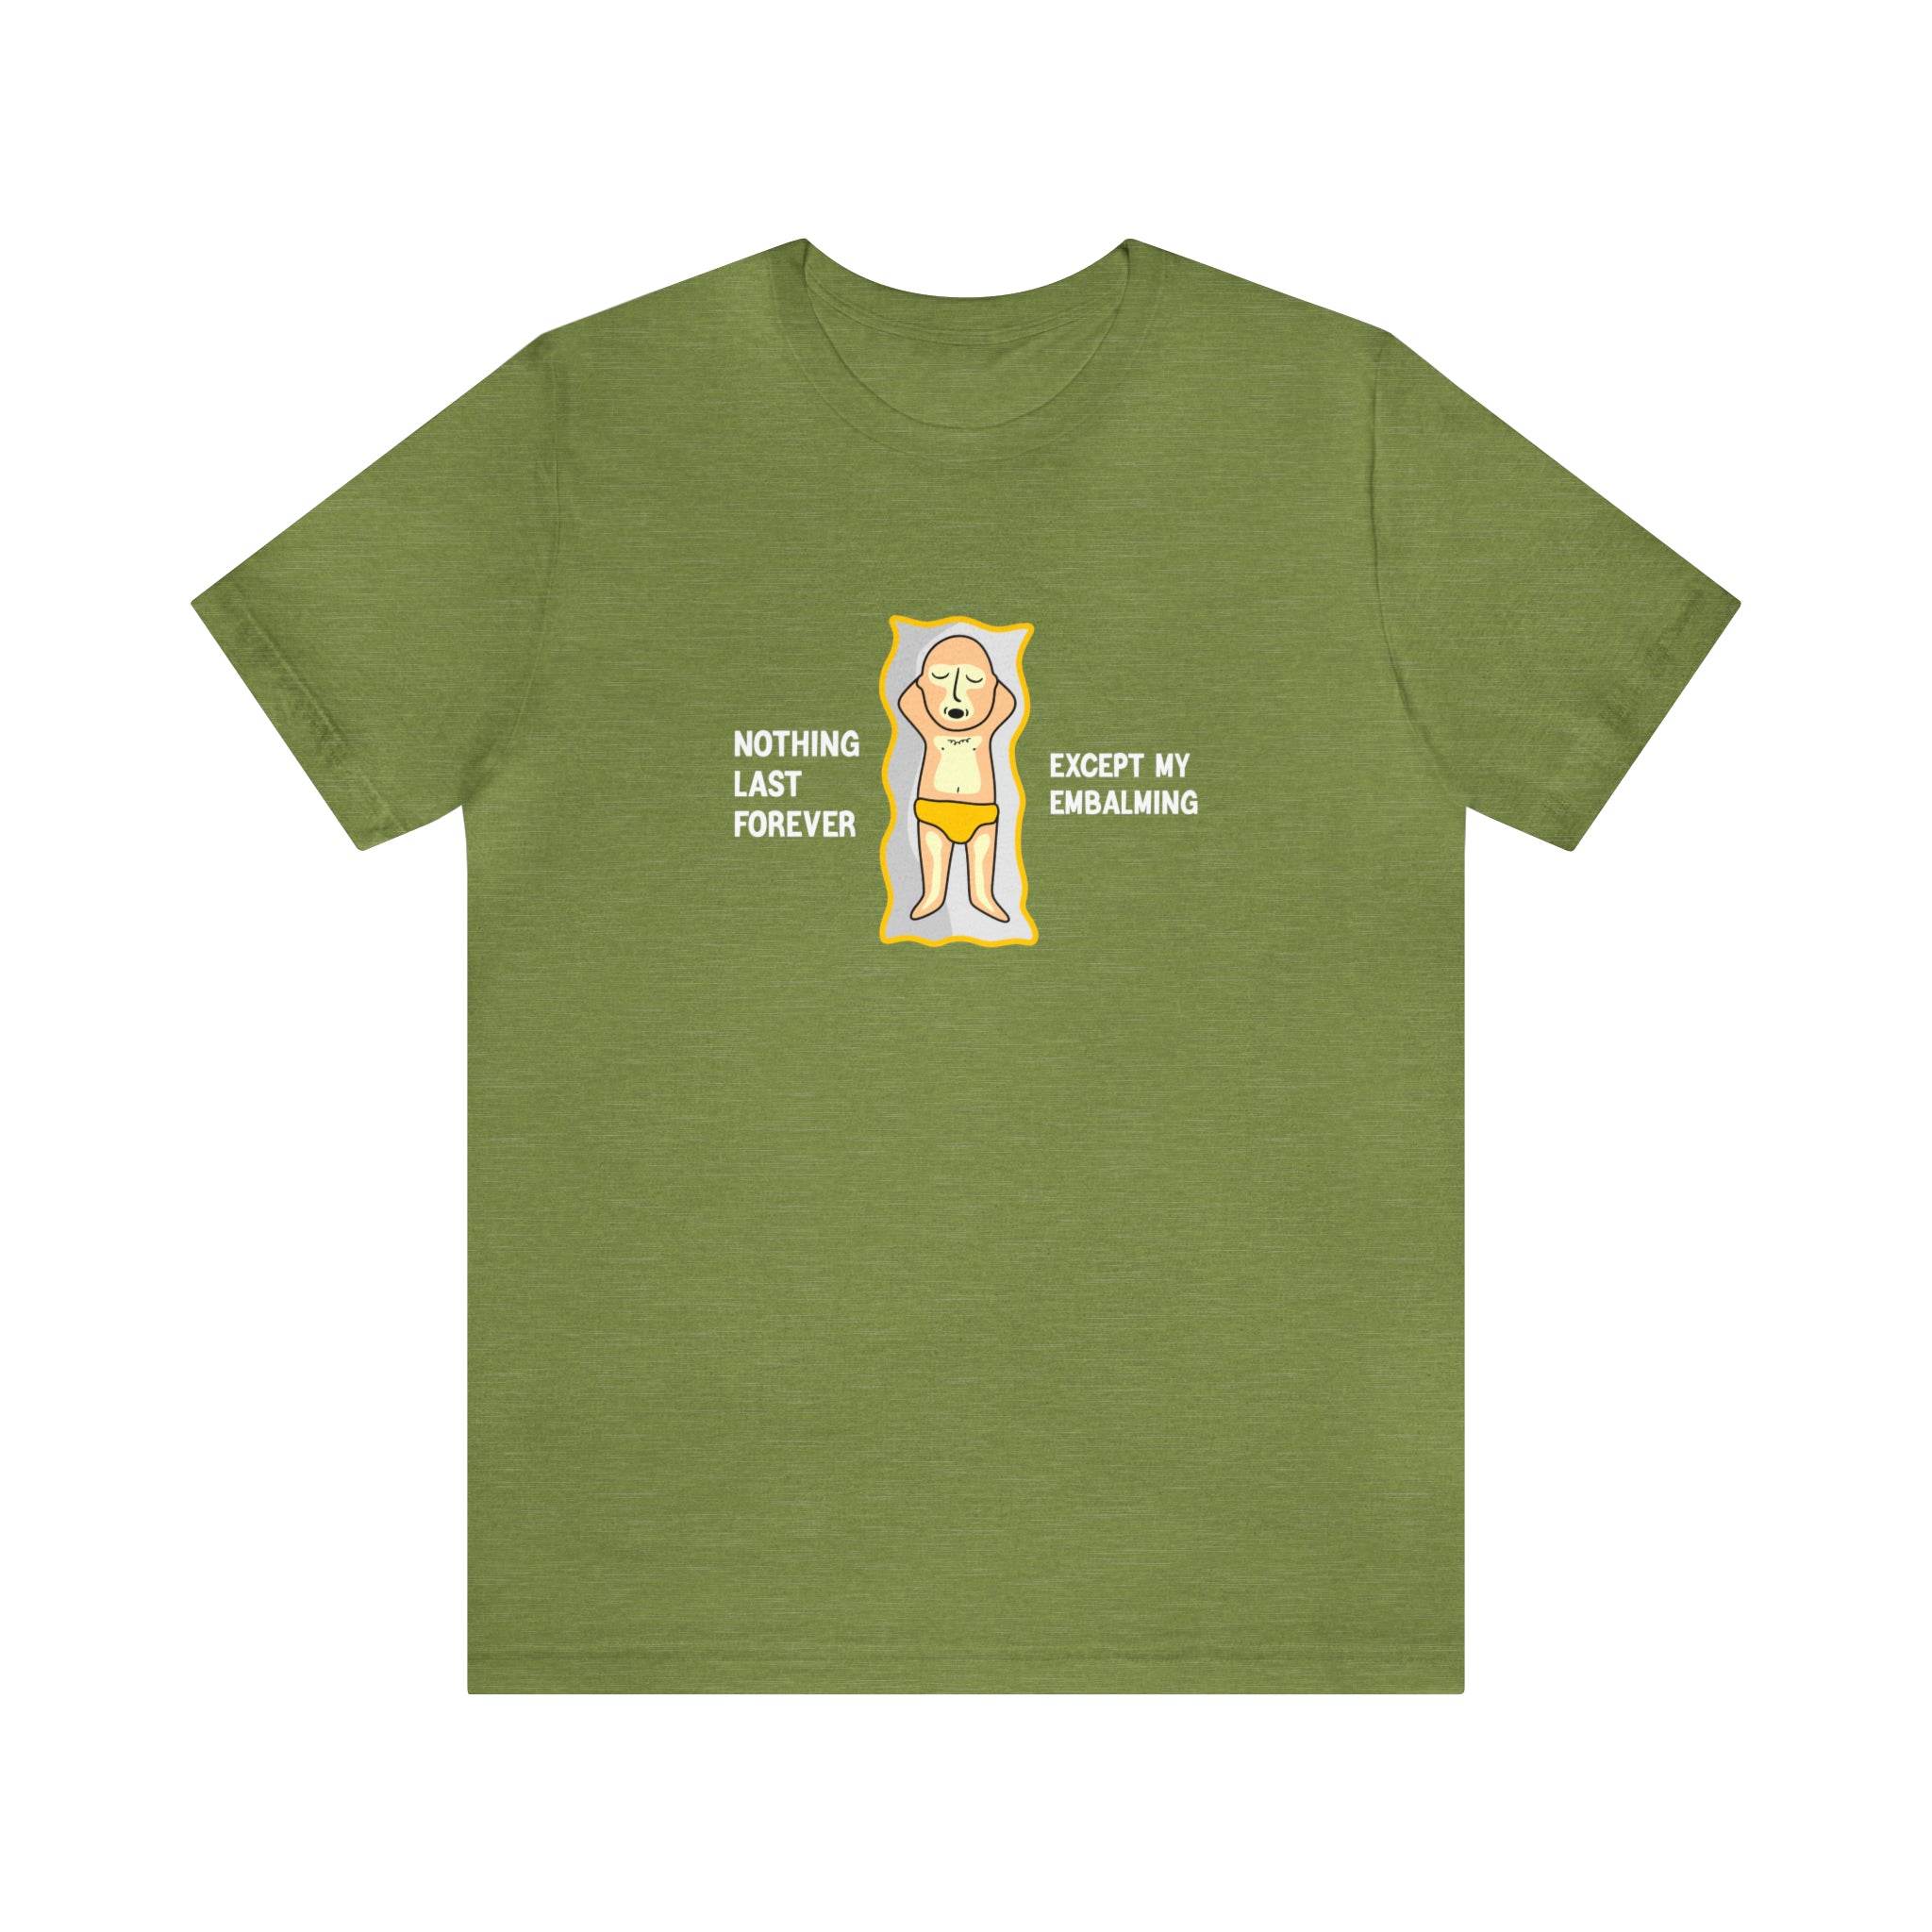 A Nothing Last Forever Except My Embalming T-Shirt featuring an image of a man in a green shirt.